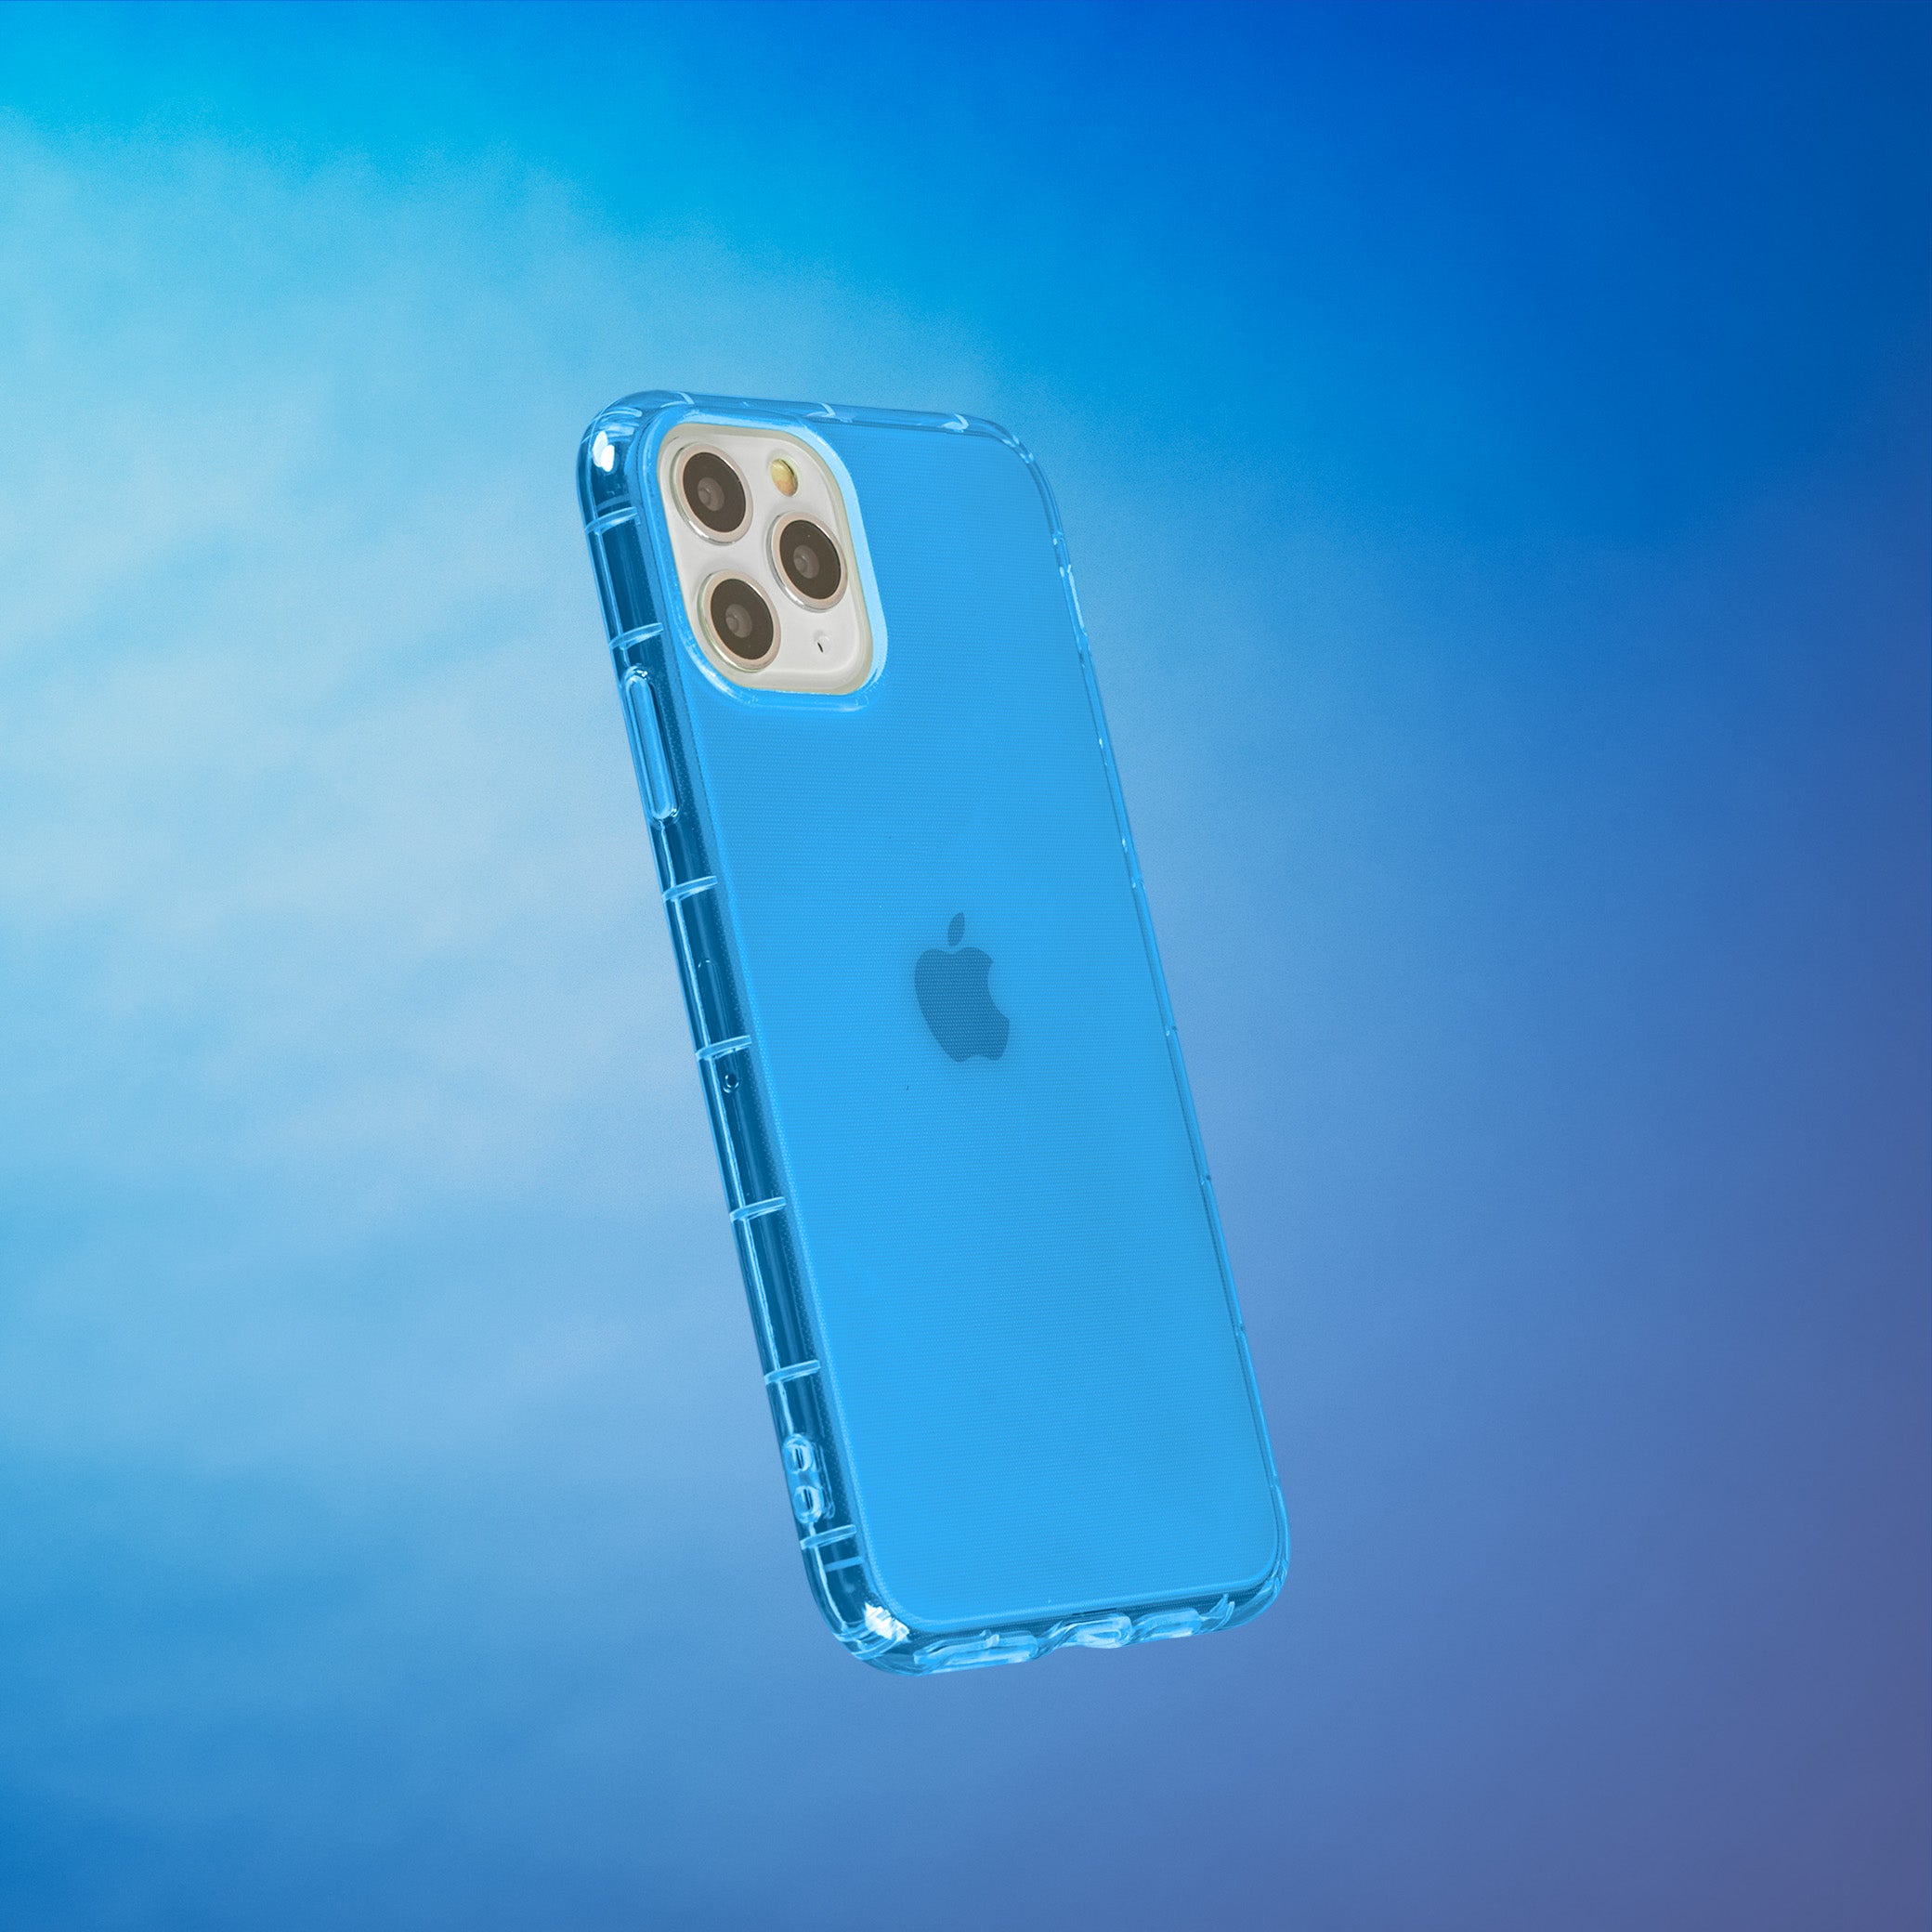 Highlighter Case for iPhone 11 Pro - Elevated Azure Blue